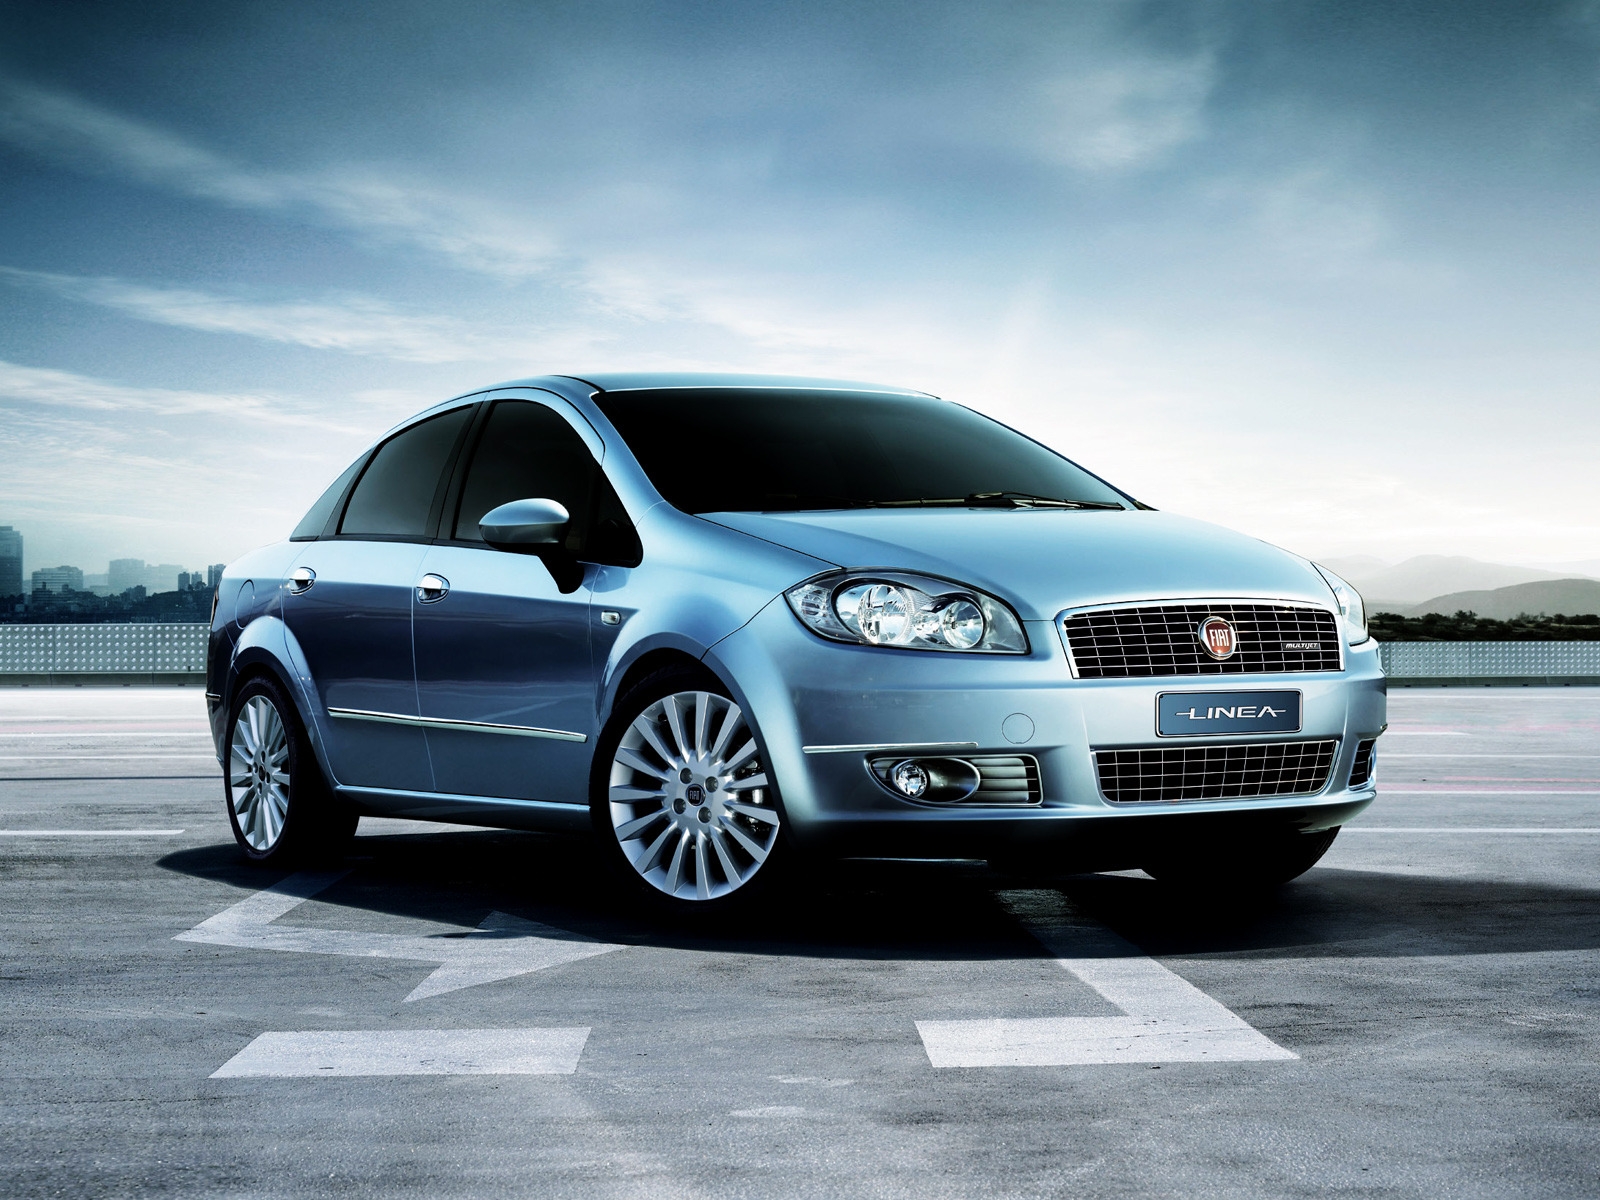 Fiat Linea 2009 for 1600 x 1200 resolution